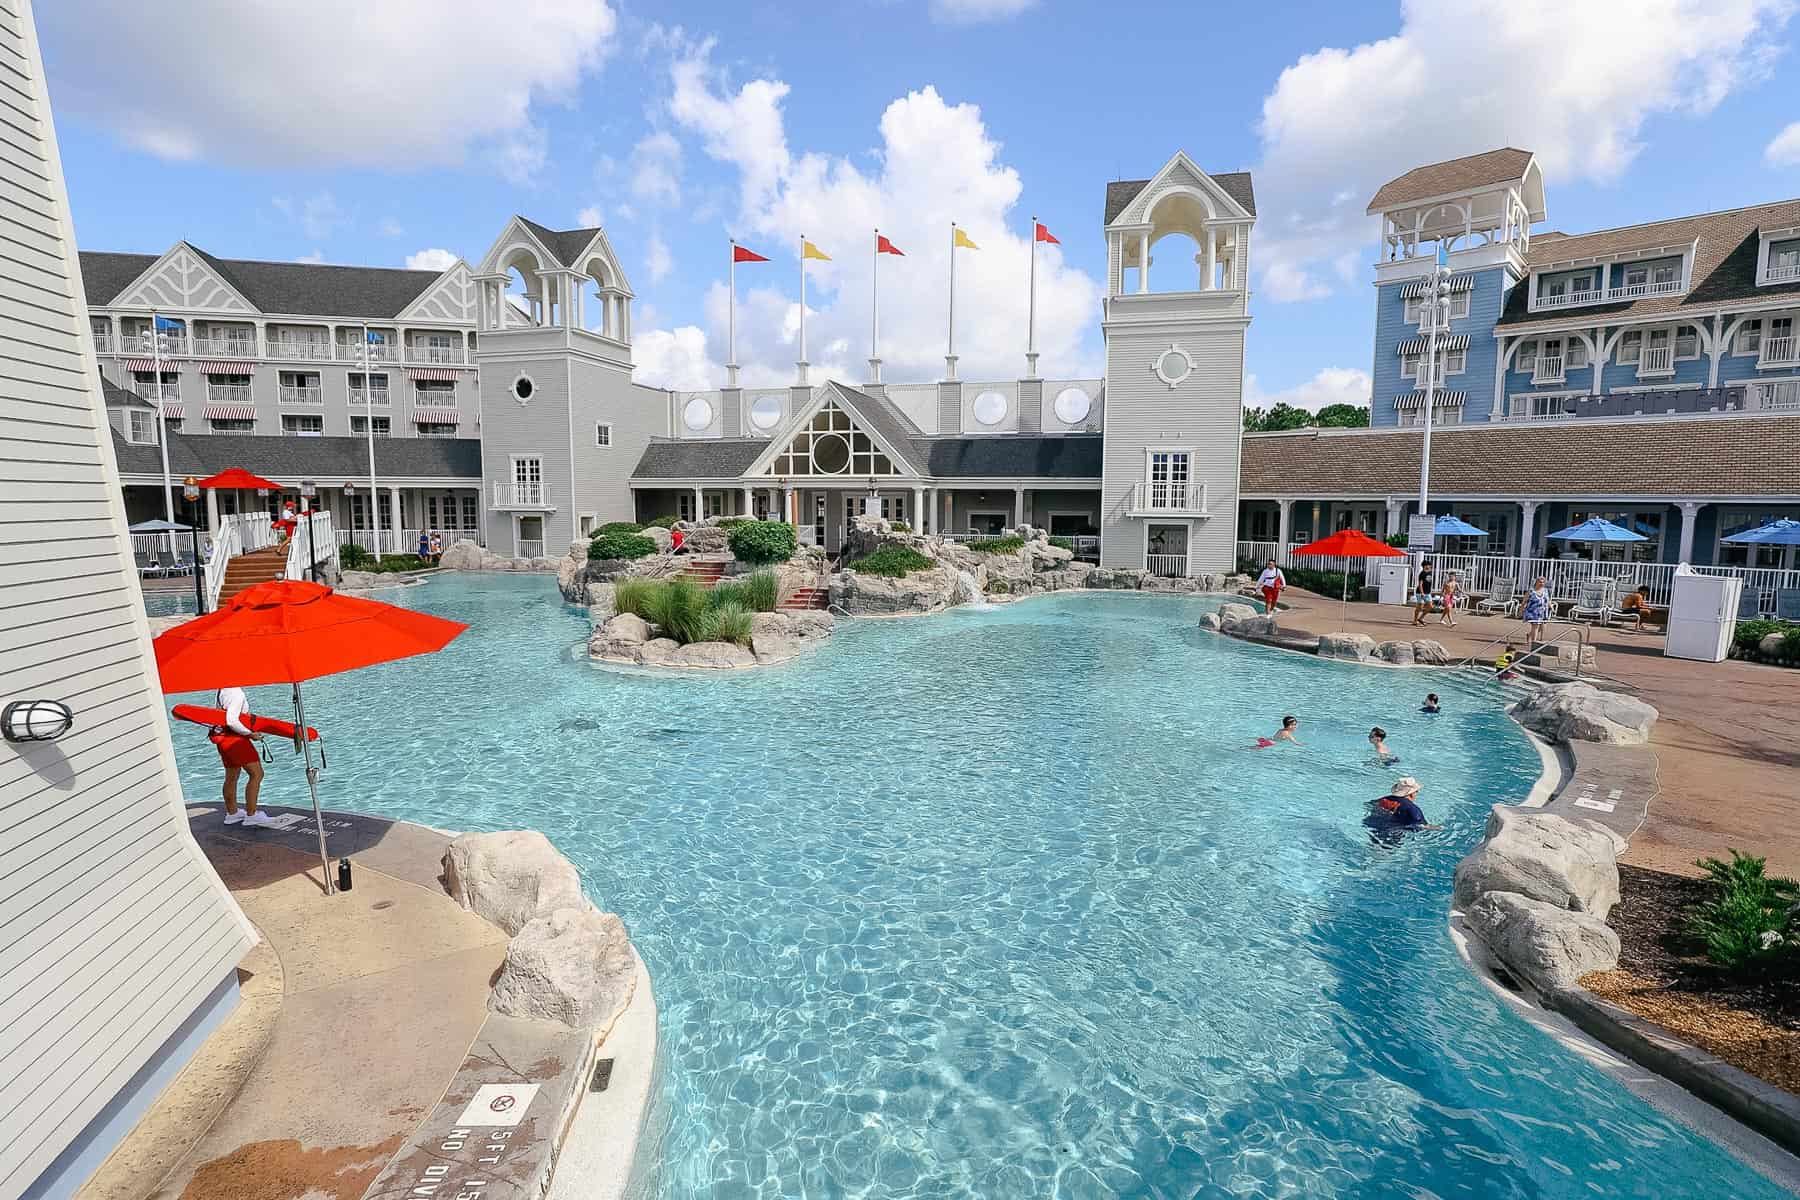 the Stormalong Bay Pool area at Disney's Yacht Club: a pool with red and yellow flags in the background 